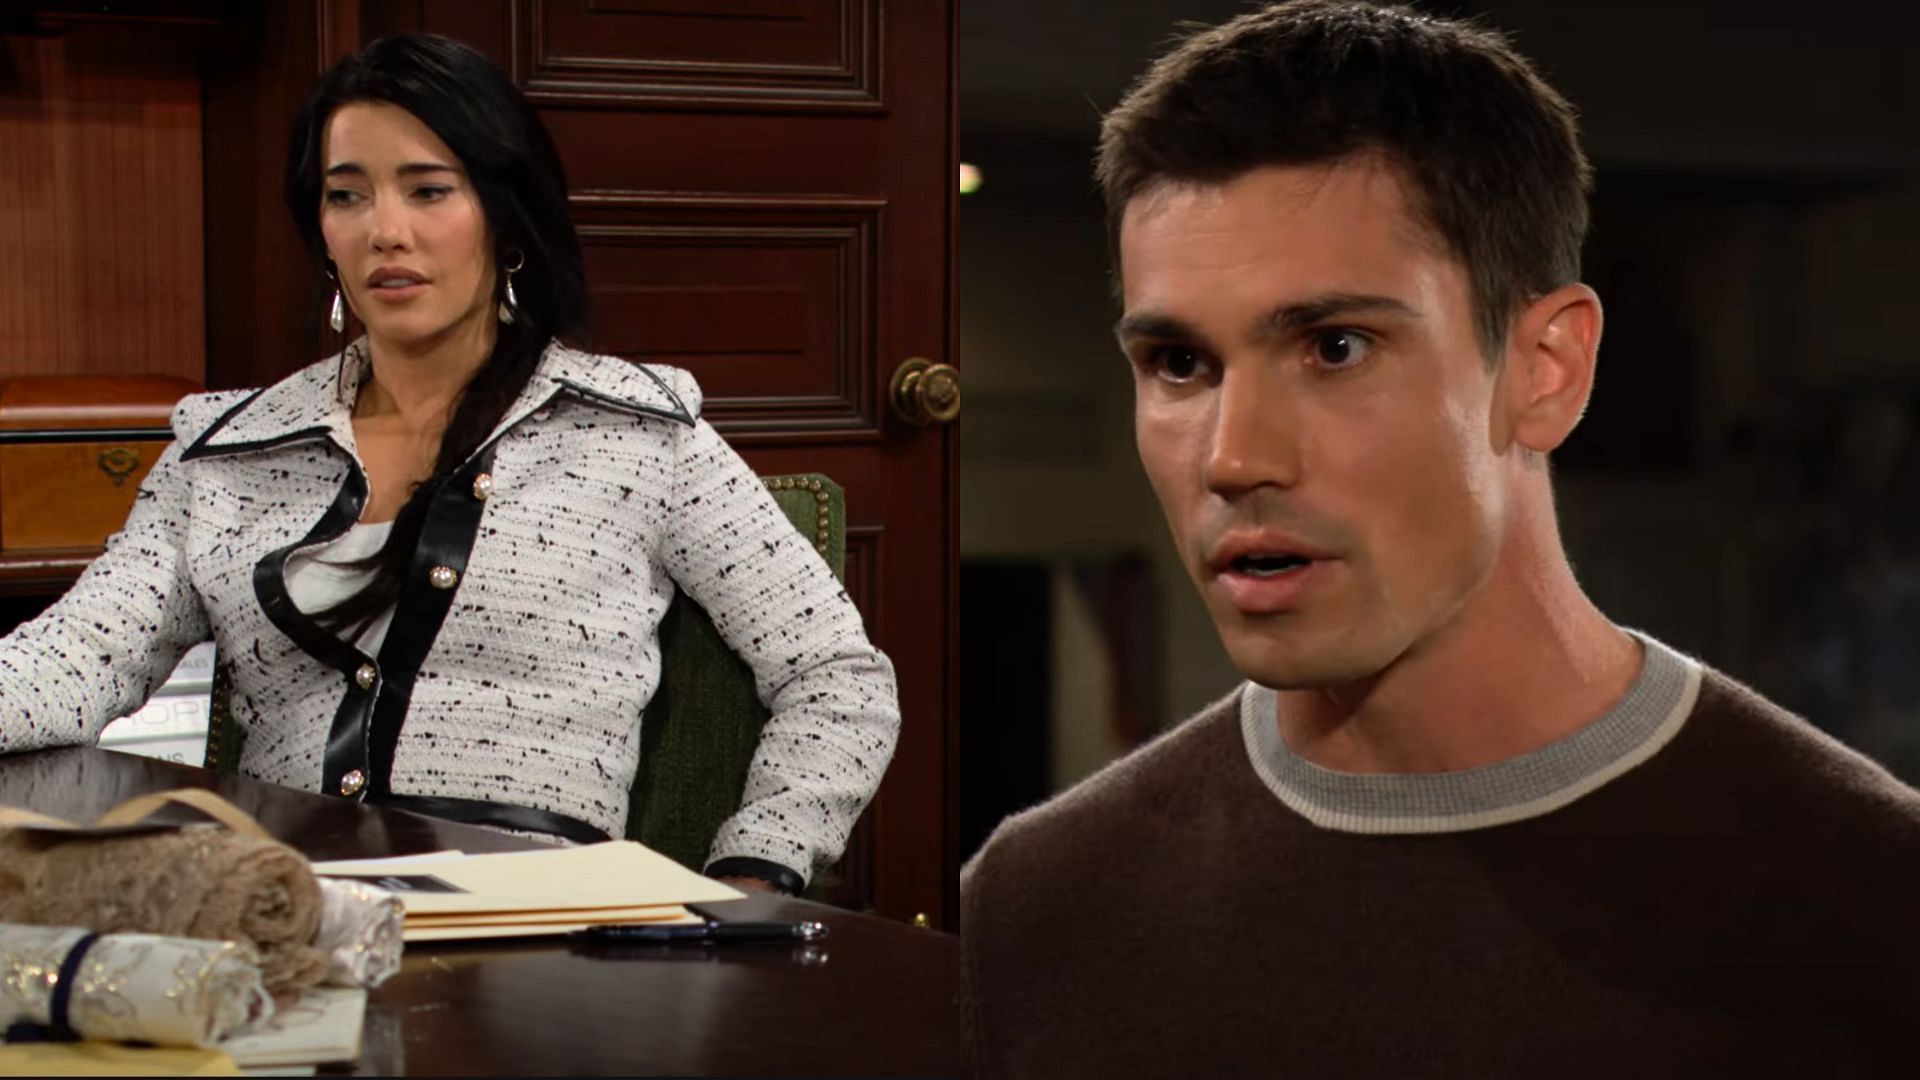 The episode ended with Finn attempting to tell Steffy about Sheila (Image via YouTube@boldandbeautiful)